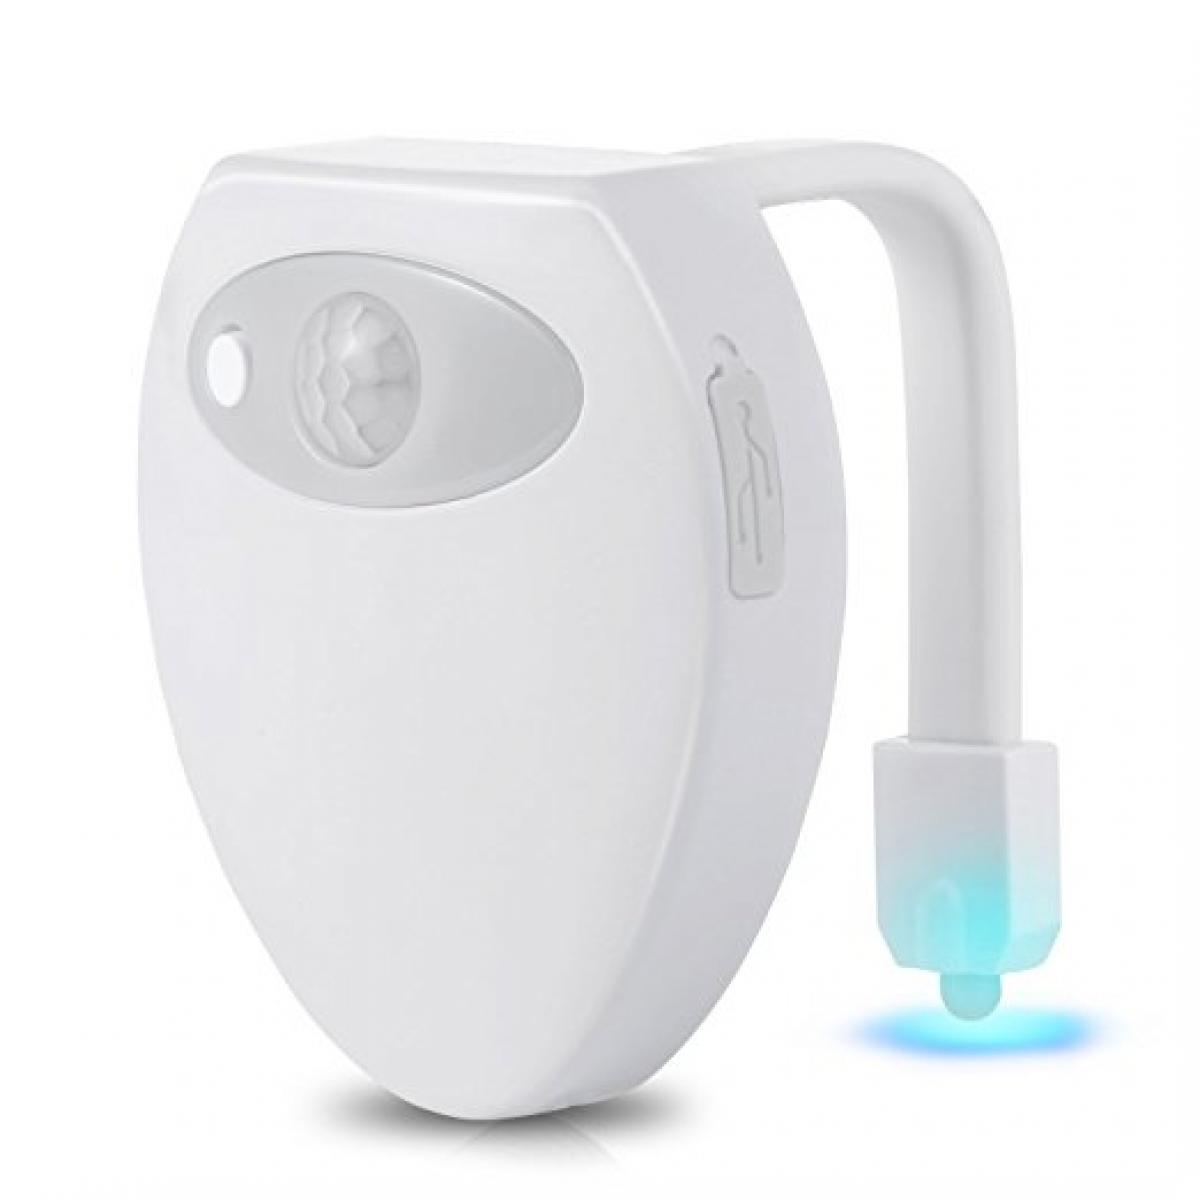 Rechargeable Toilet Night Light